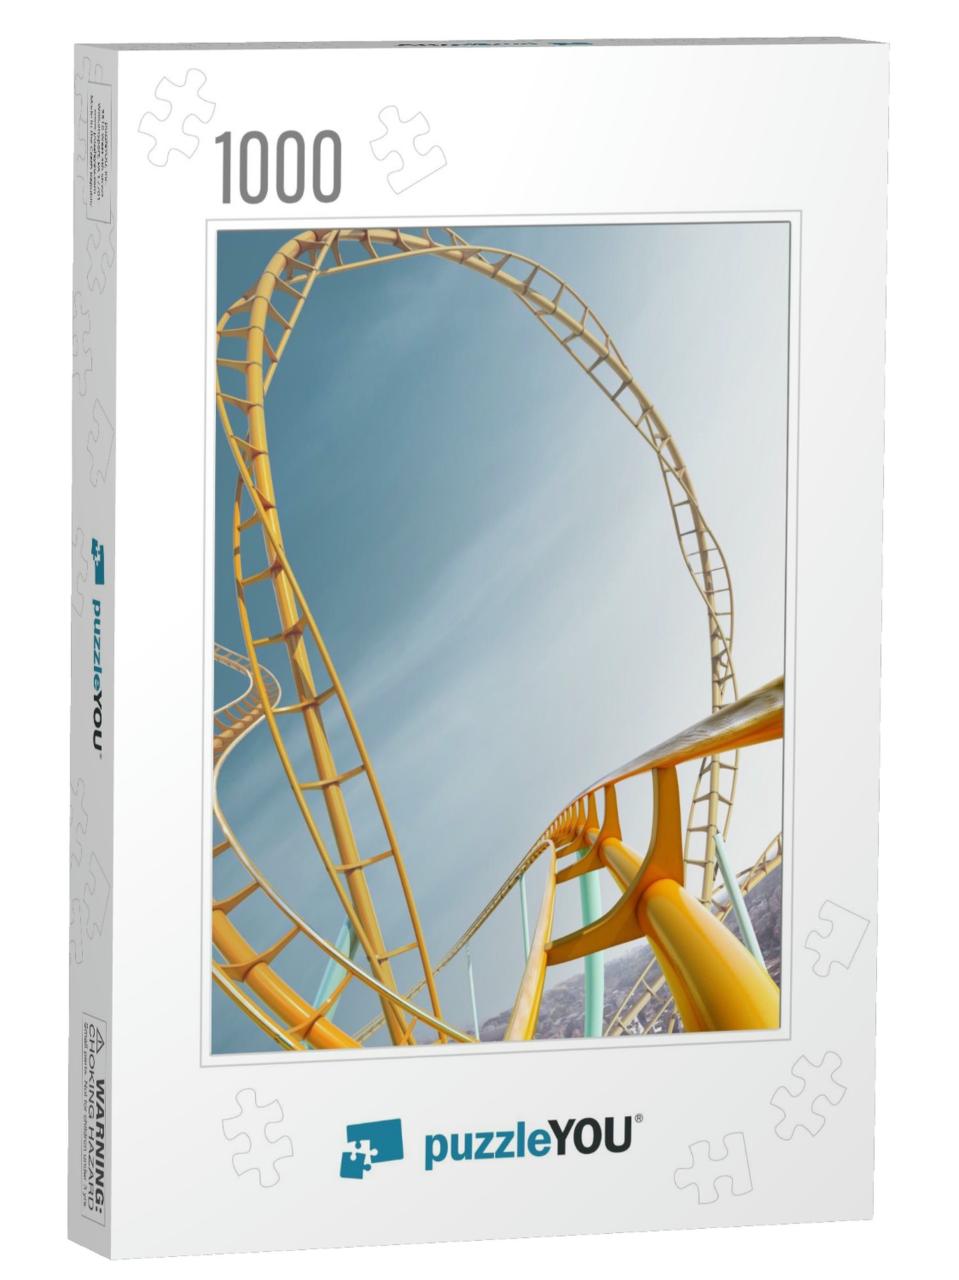 Roller-Coaster Background Blue Sky Empty 3D Illustration... Jigsaw Puzzle with 1000 pieces